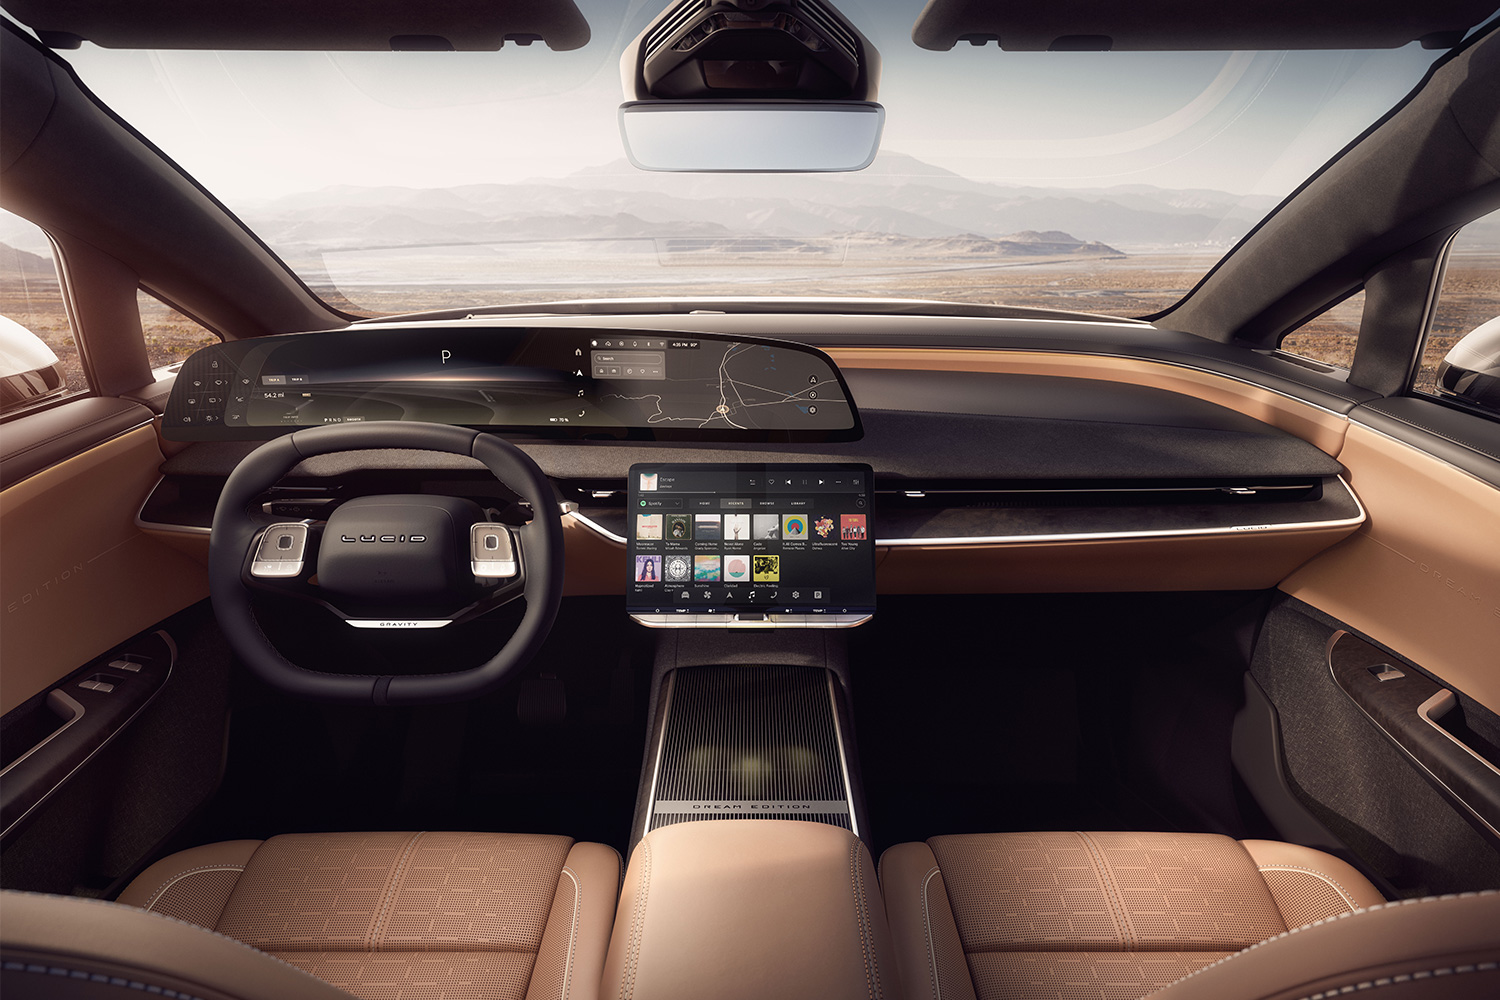 Lucid Gravity SUV interior and dashboard